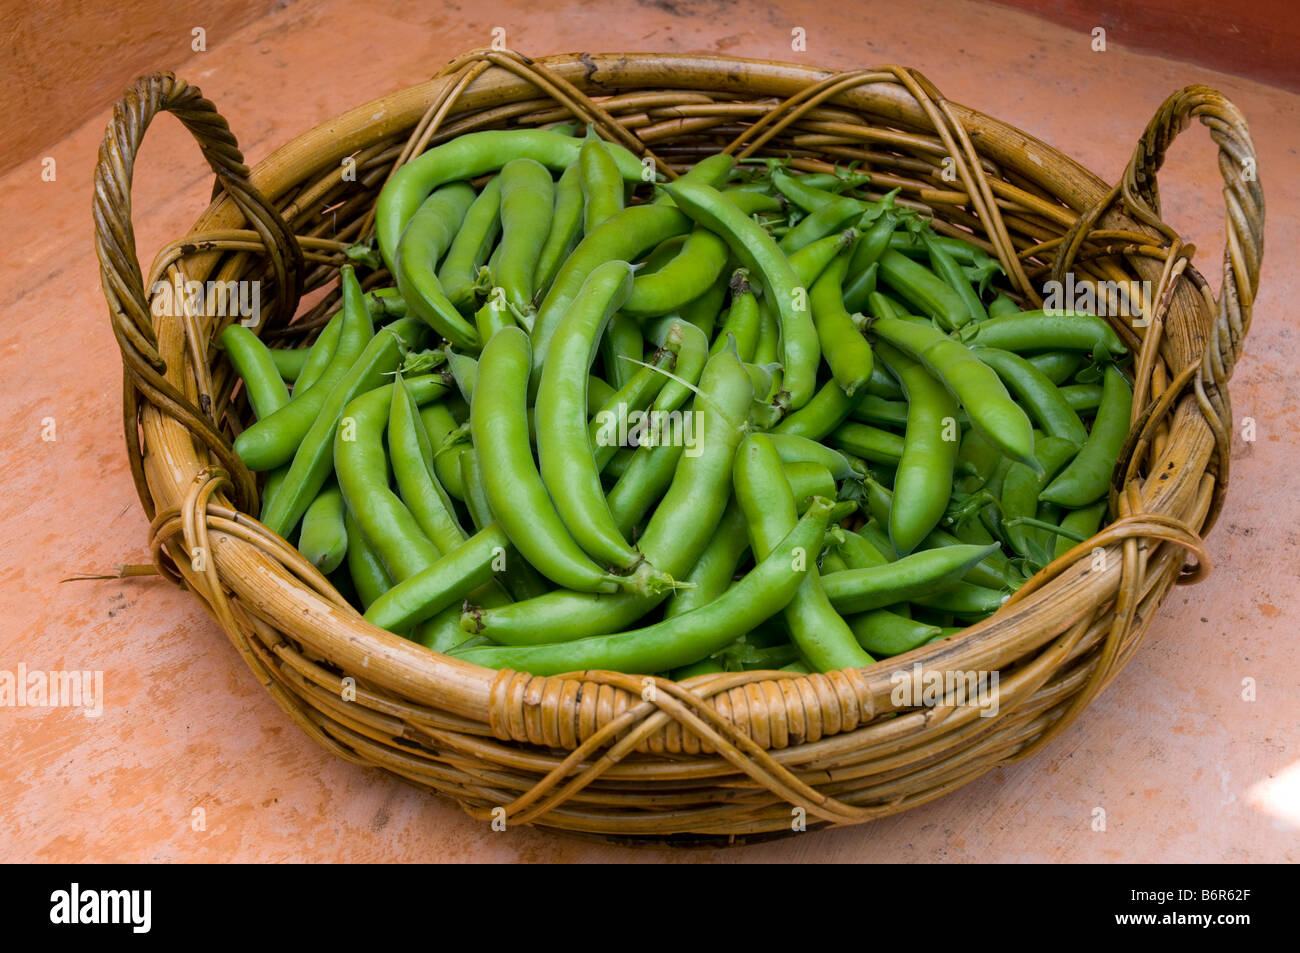 Freshly picked young broad beans in basket Stock Photo